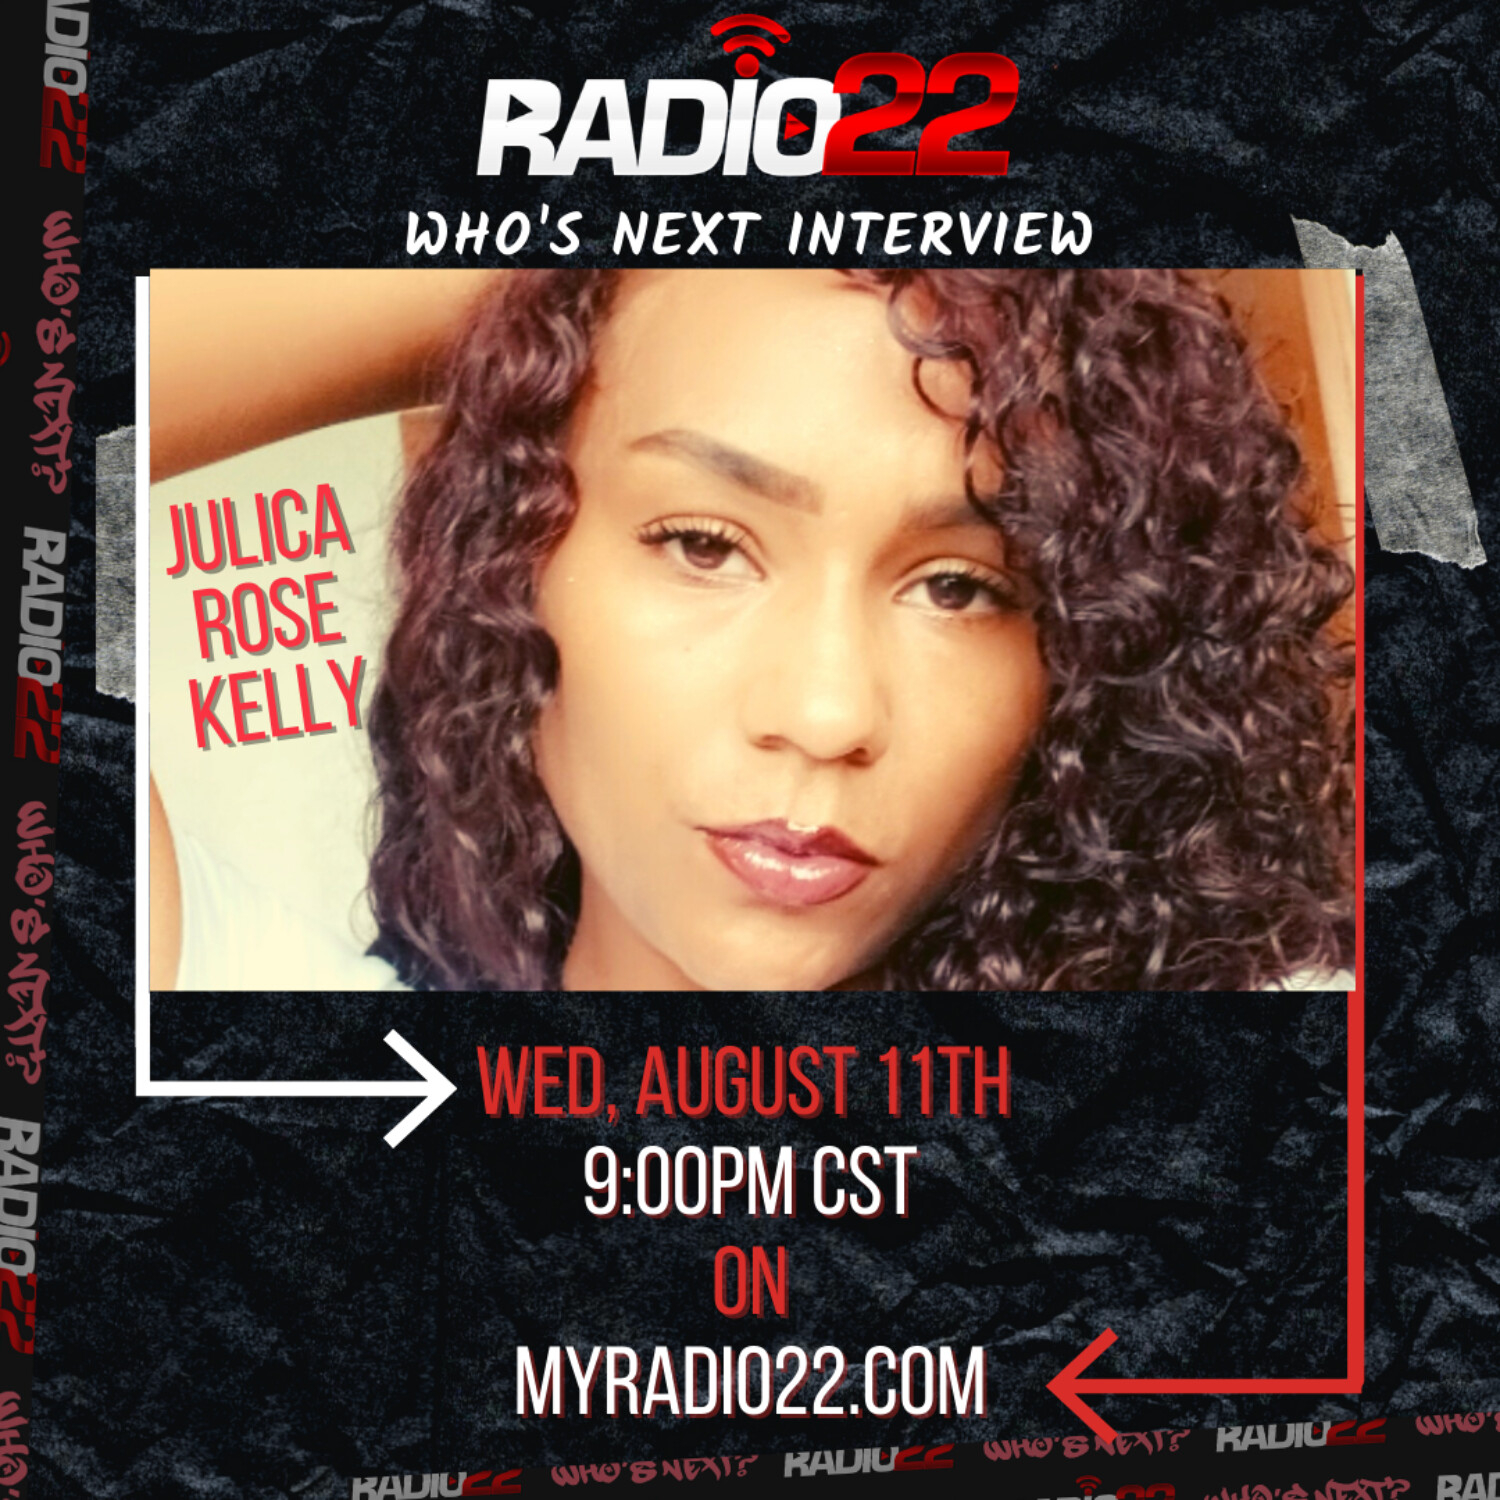 Who’s Next: Julica Rose Kelly Interview